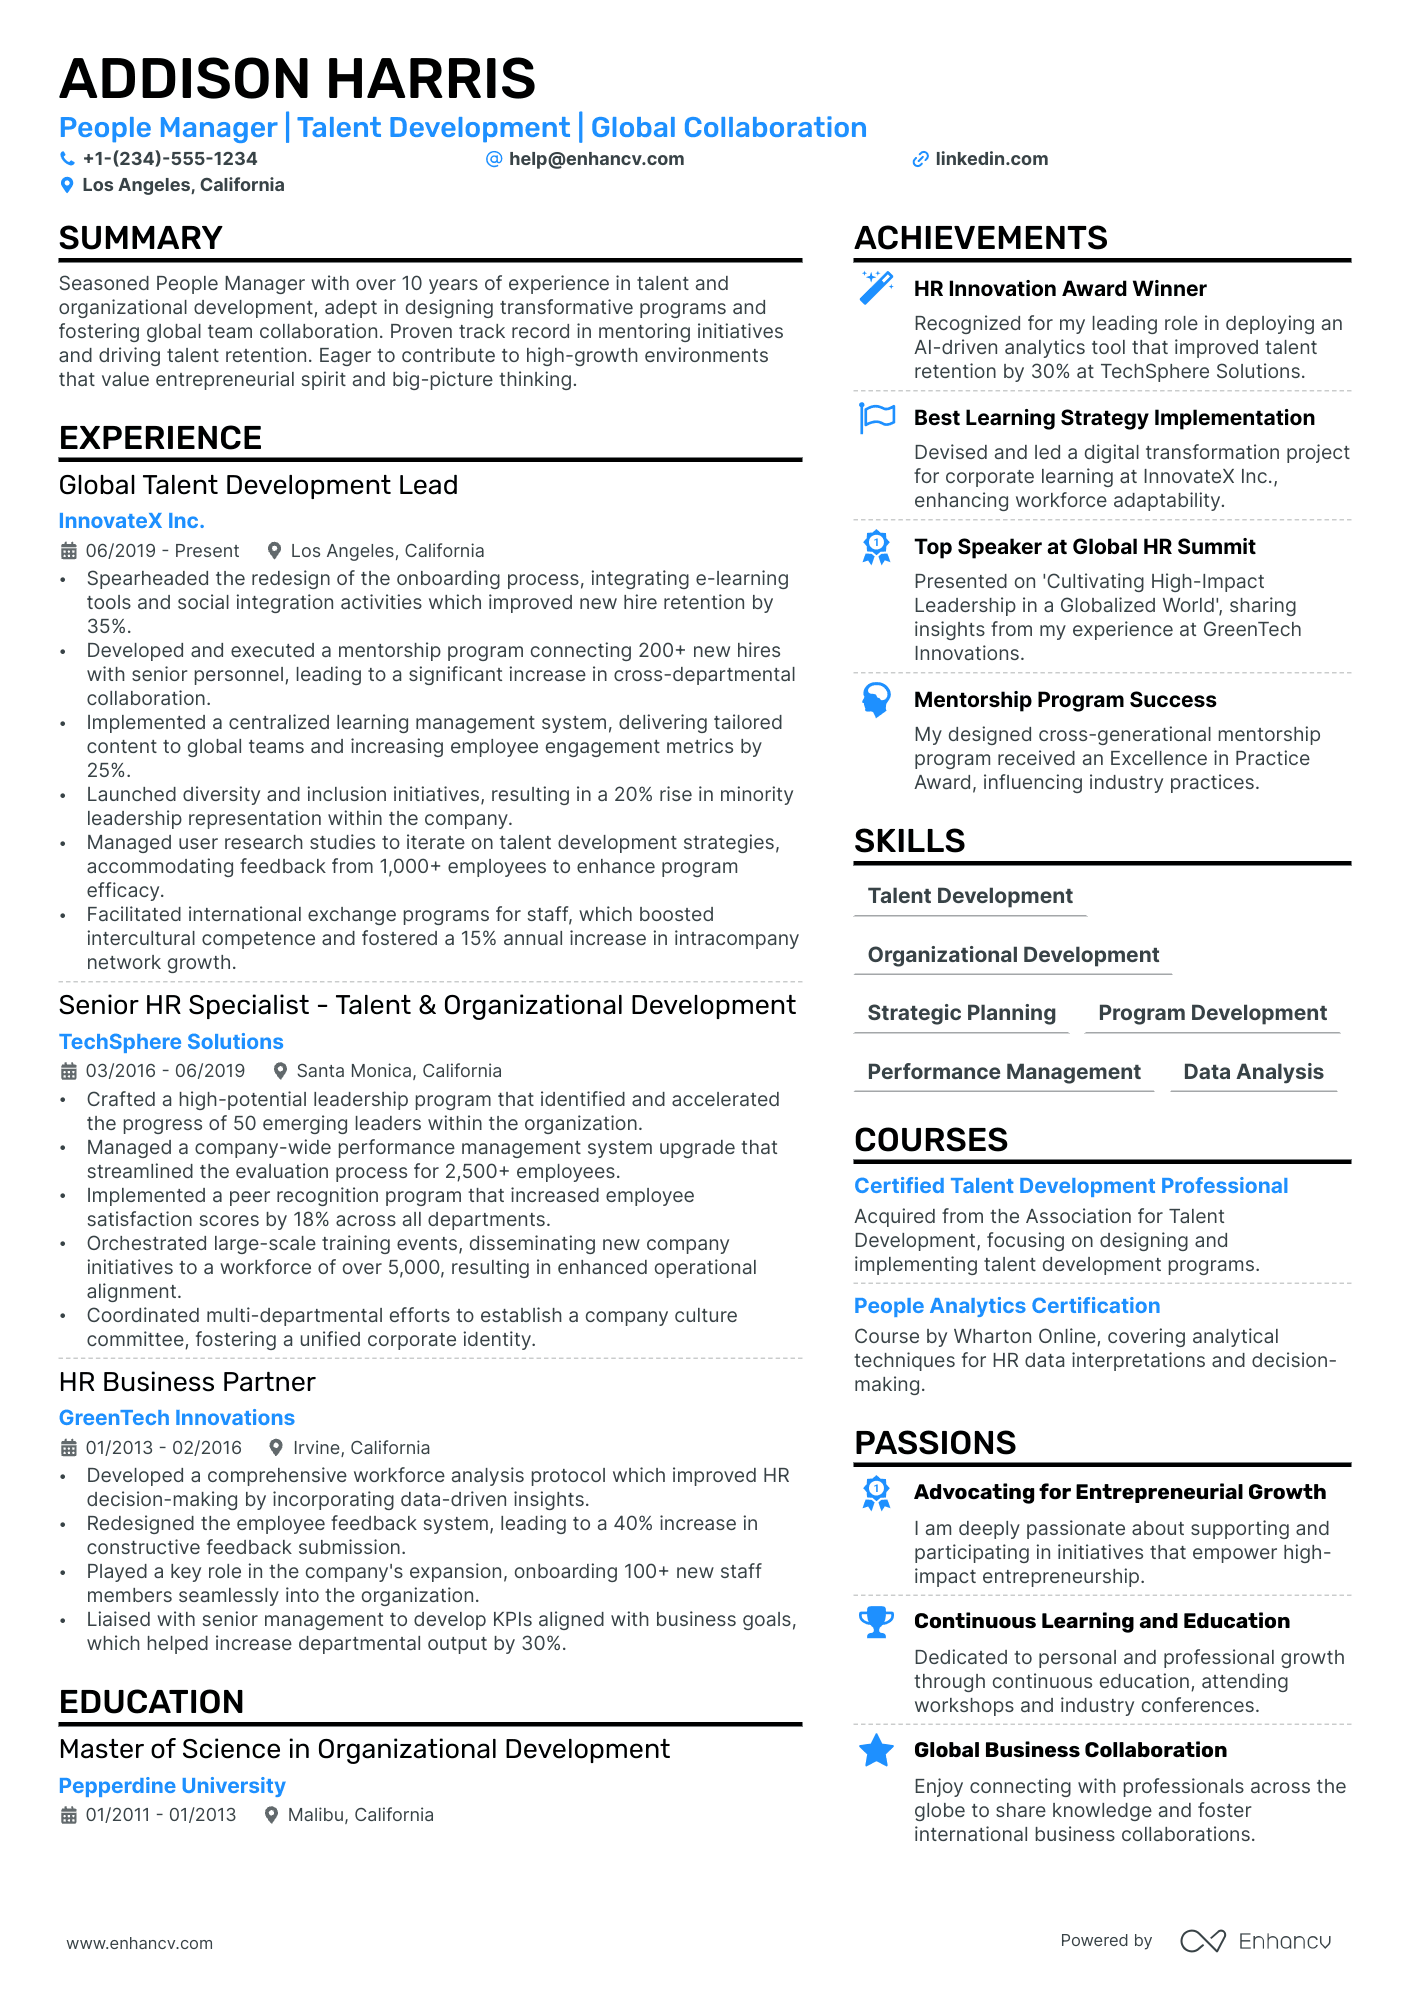 People Manager resume example